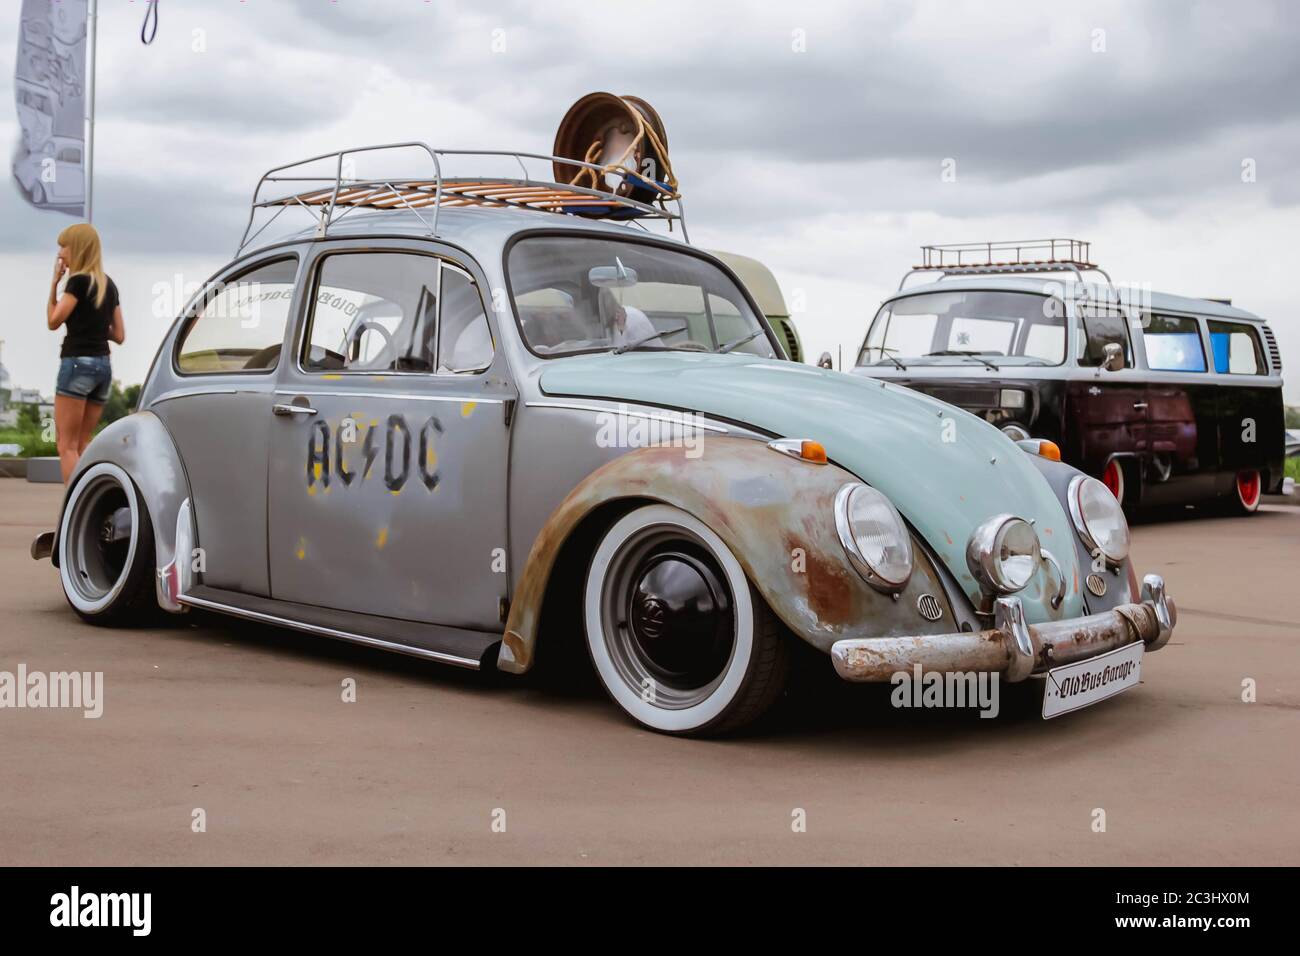 Moscow. Russia - May 20, 2019: Specially aged rat look Volkswagen beetle t1 parked on the street. On the car it is written ACIDC. Modified legendary urban retro car of the first generation. Stock Photo